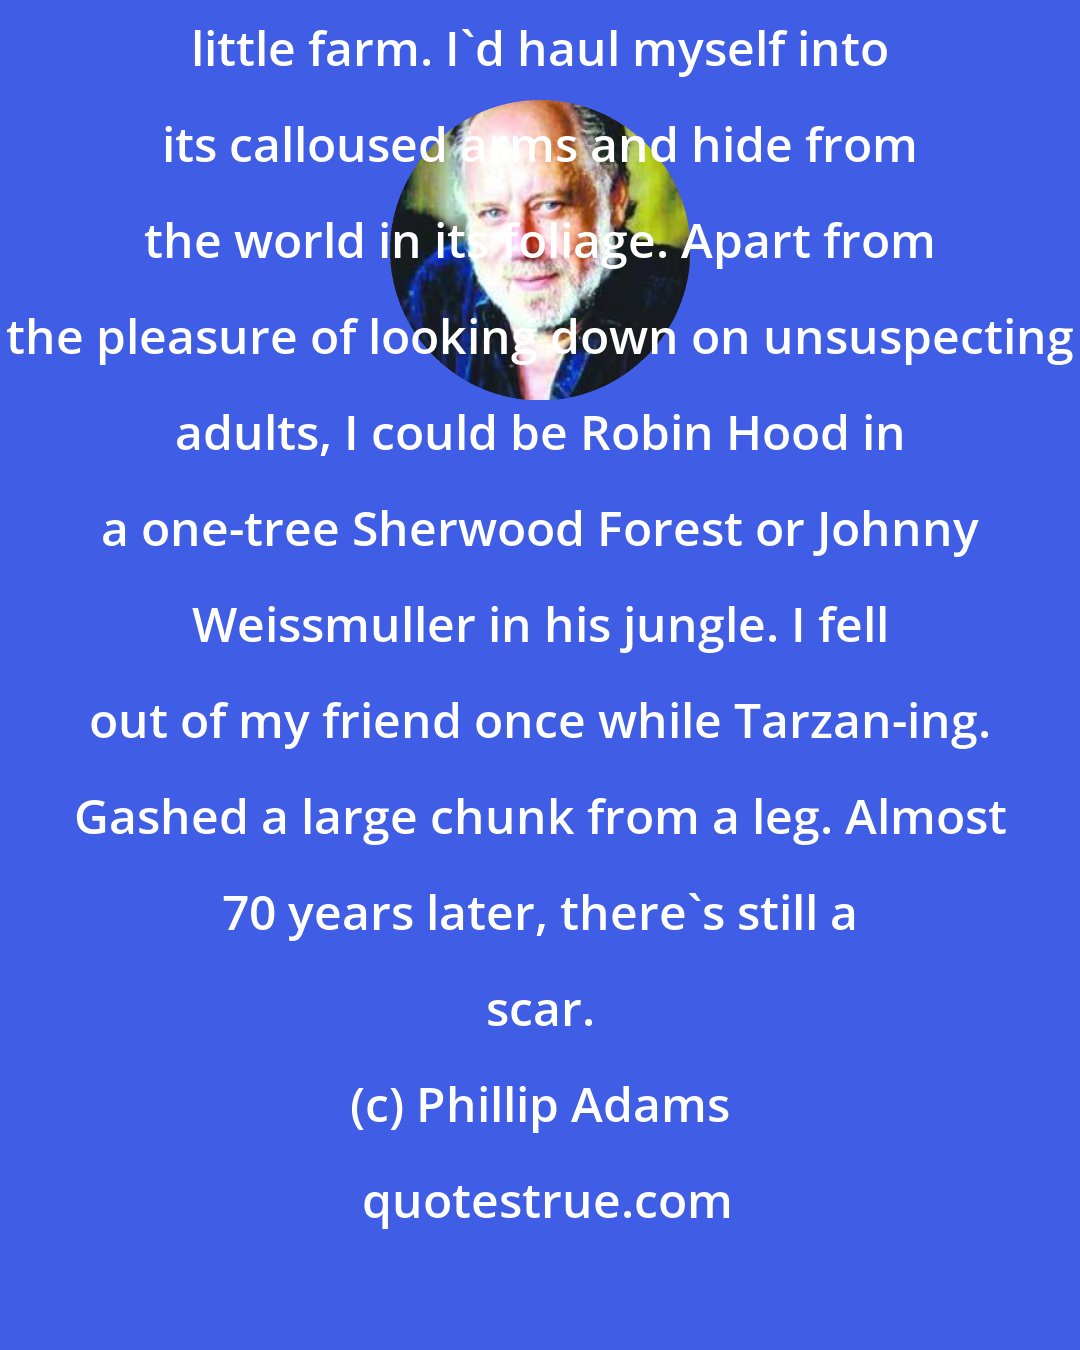 Phillip Adams: When I was five, a tree was my best friend. An old peppercorn on Grandpa's little farm. I'd haul myself into its calloused arms and hide from the world in its foliage. Apart from the pleasure of looking down on unsuspecting adults, I could be Robin Hood in a one-tree Sherwood Forest or Johnny Weissmuller in his jungle. I fell out of my friend once while Tarzan-ing. Gashed a large chunk from a leg. Almost 70 years later, there's still a scar.